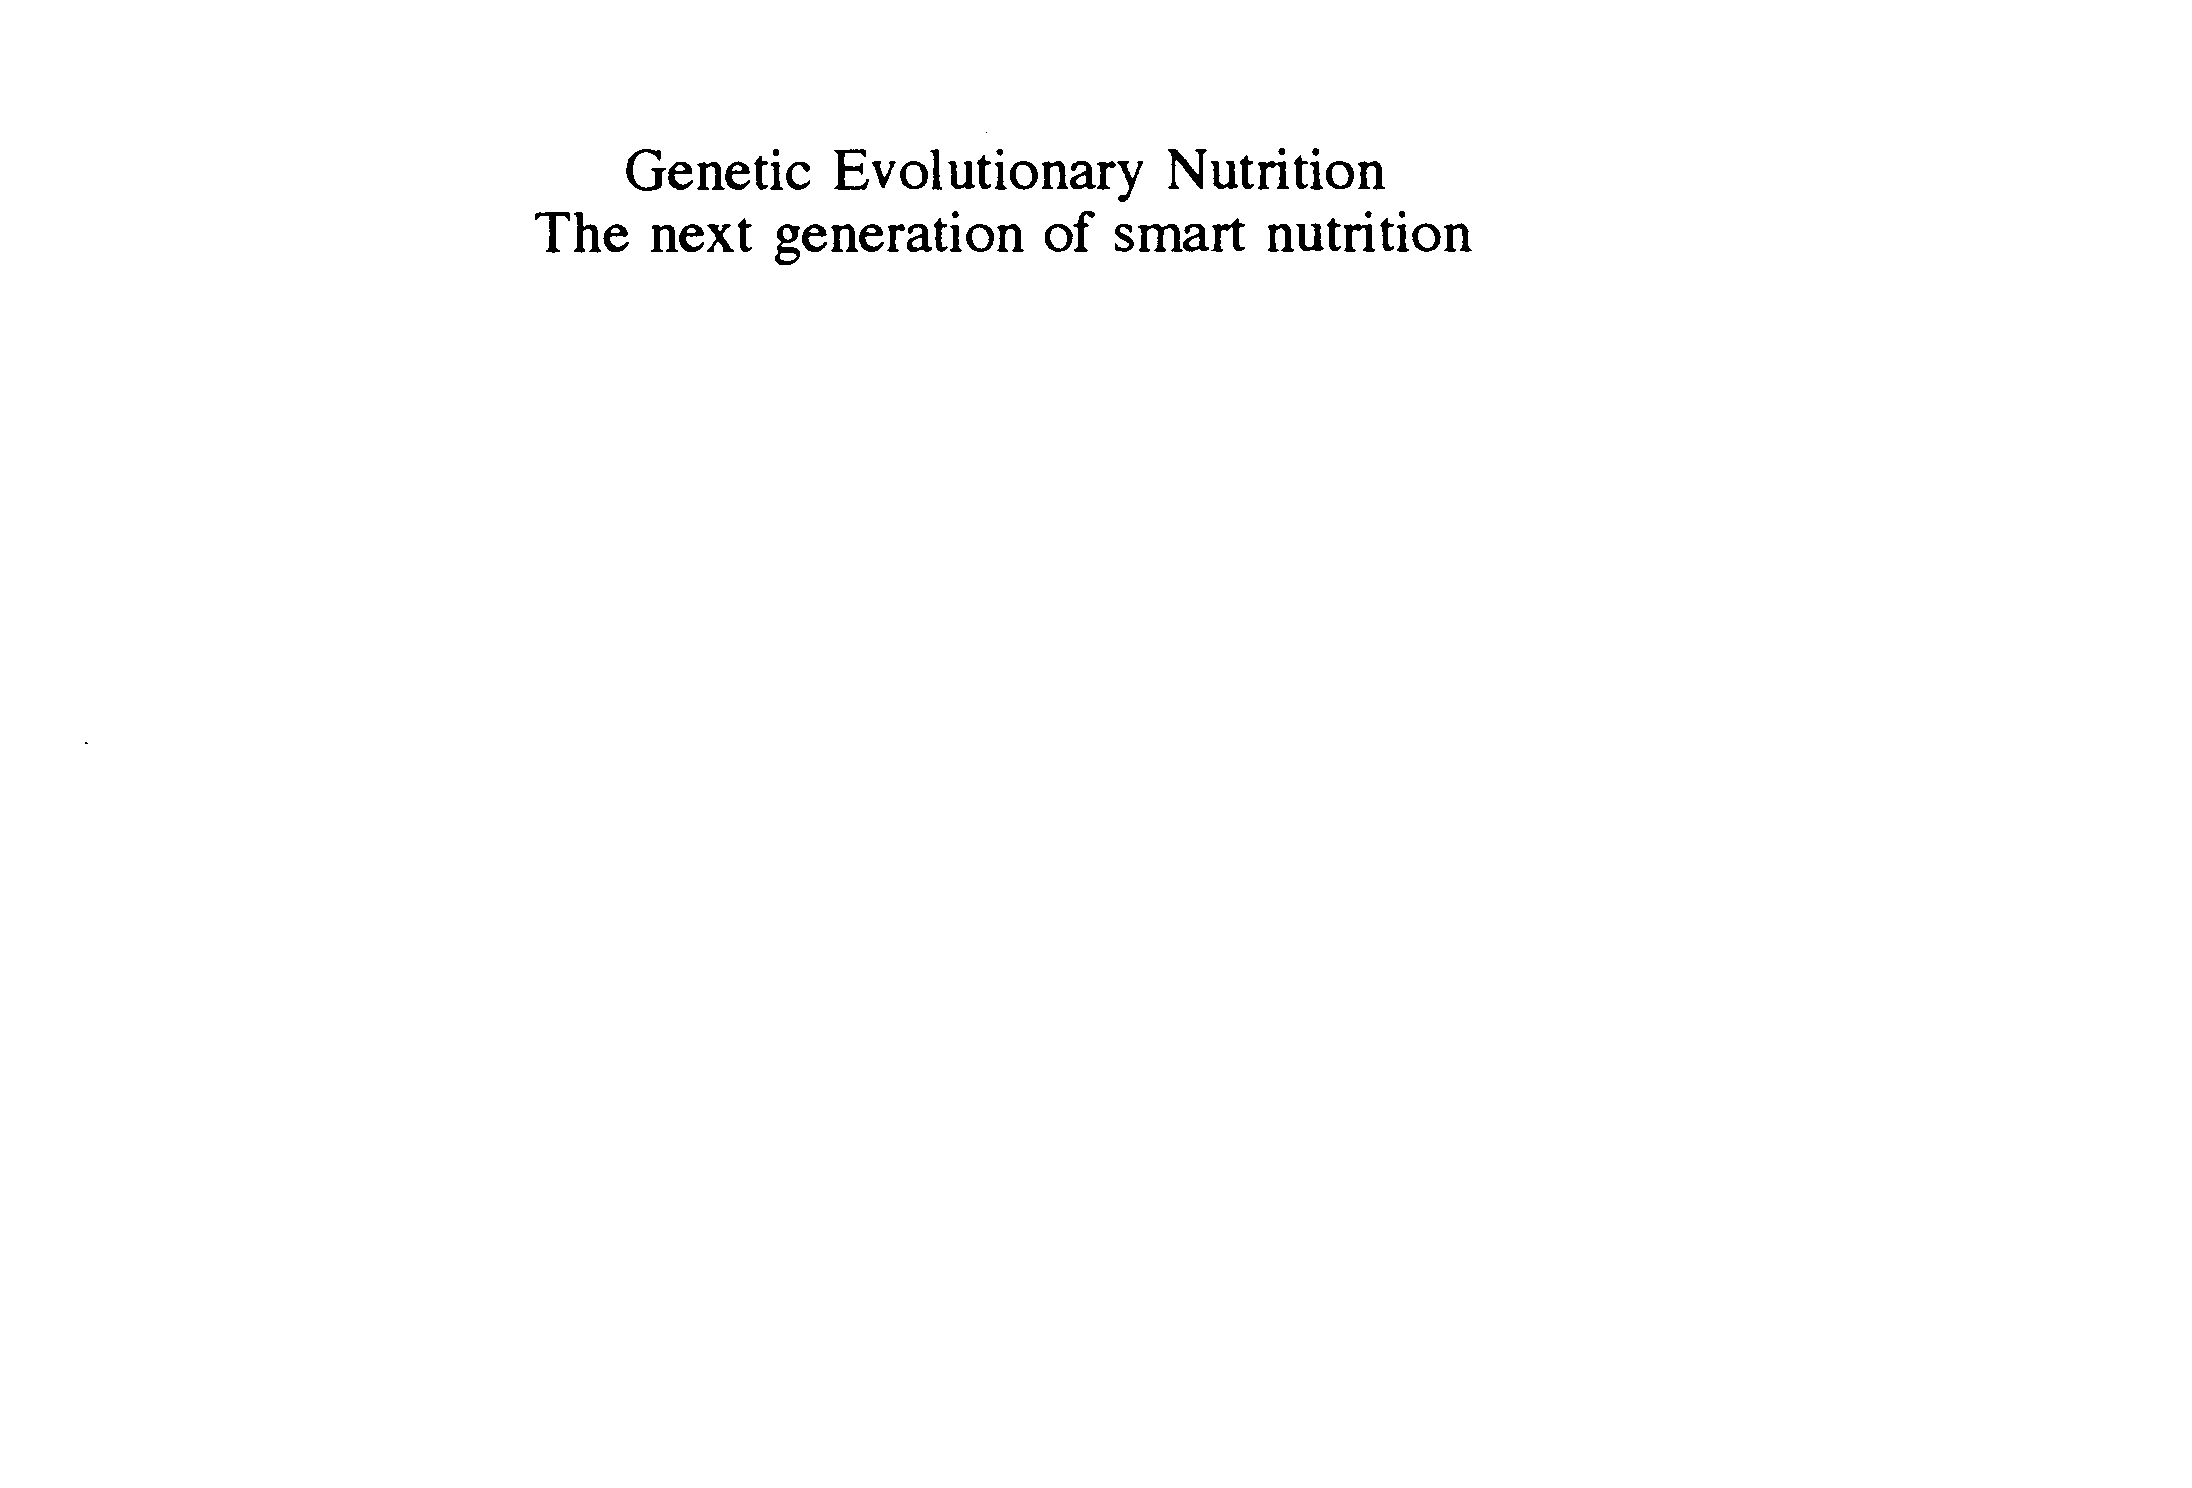  GENETIC EVOLUTIONARY NUTRITION THE NEXT GENERATION OF SMART NUTRITION